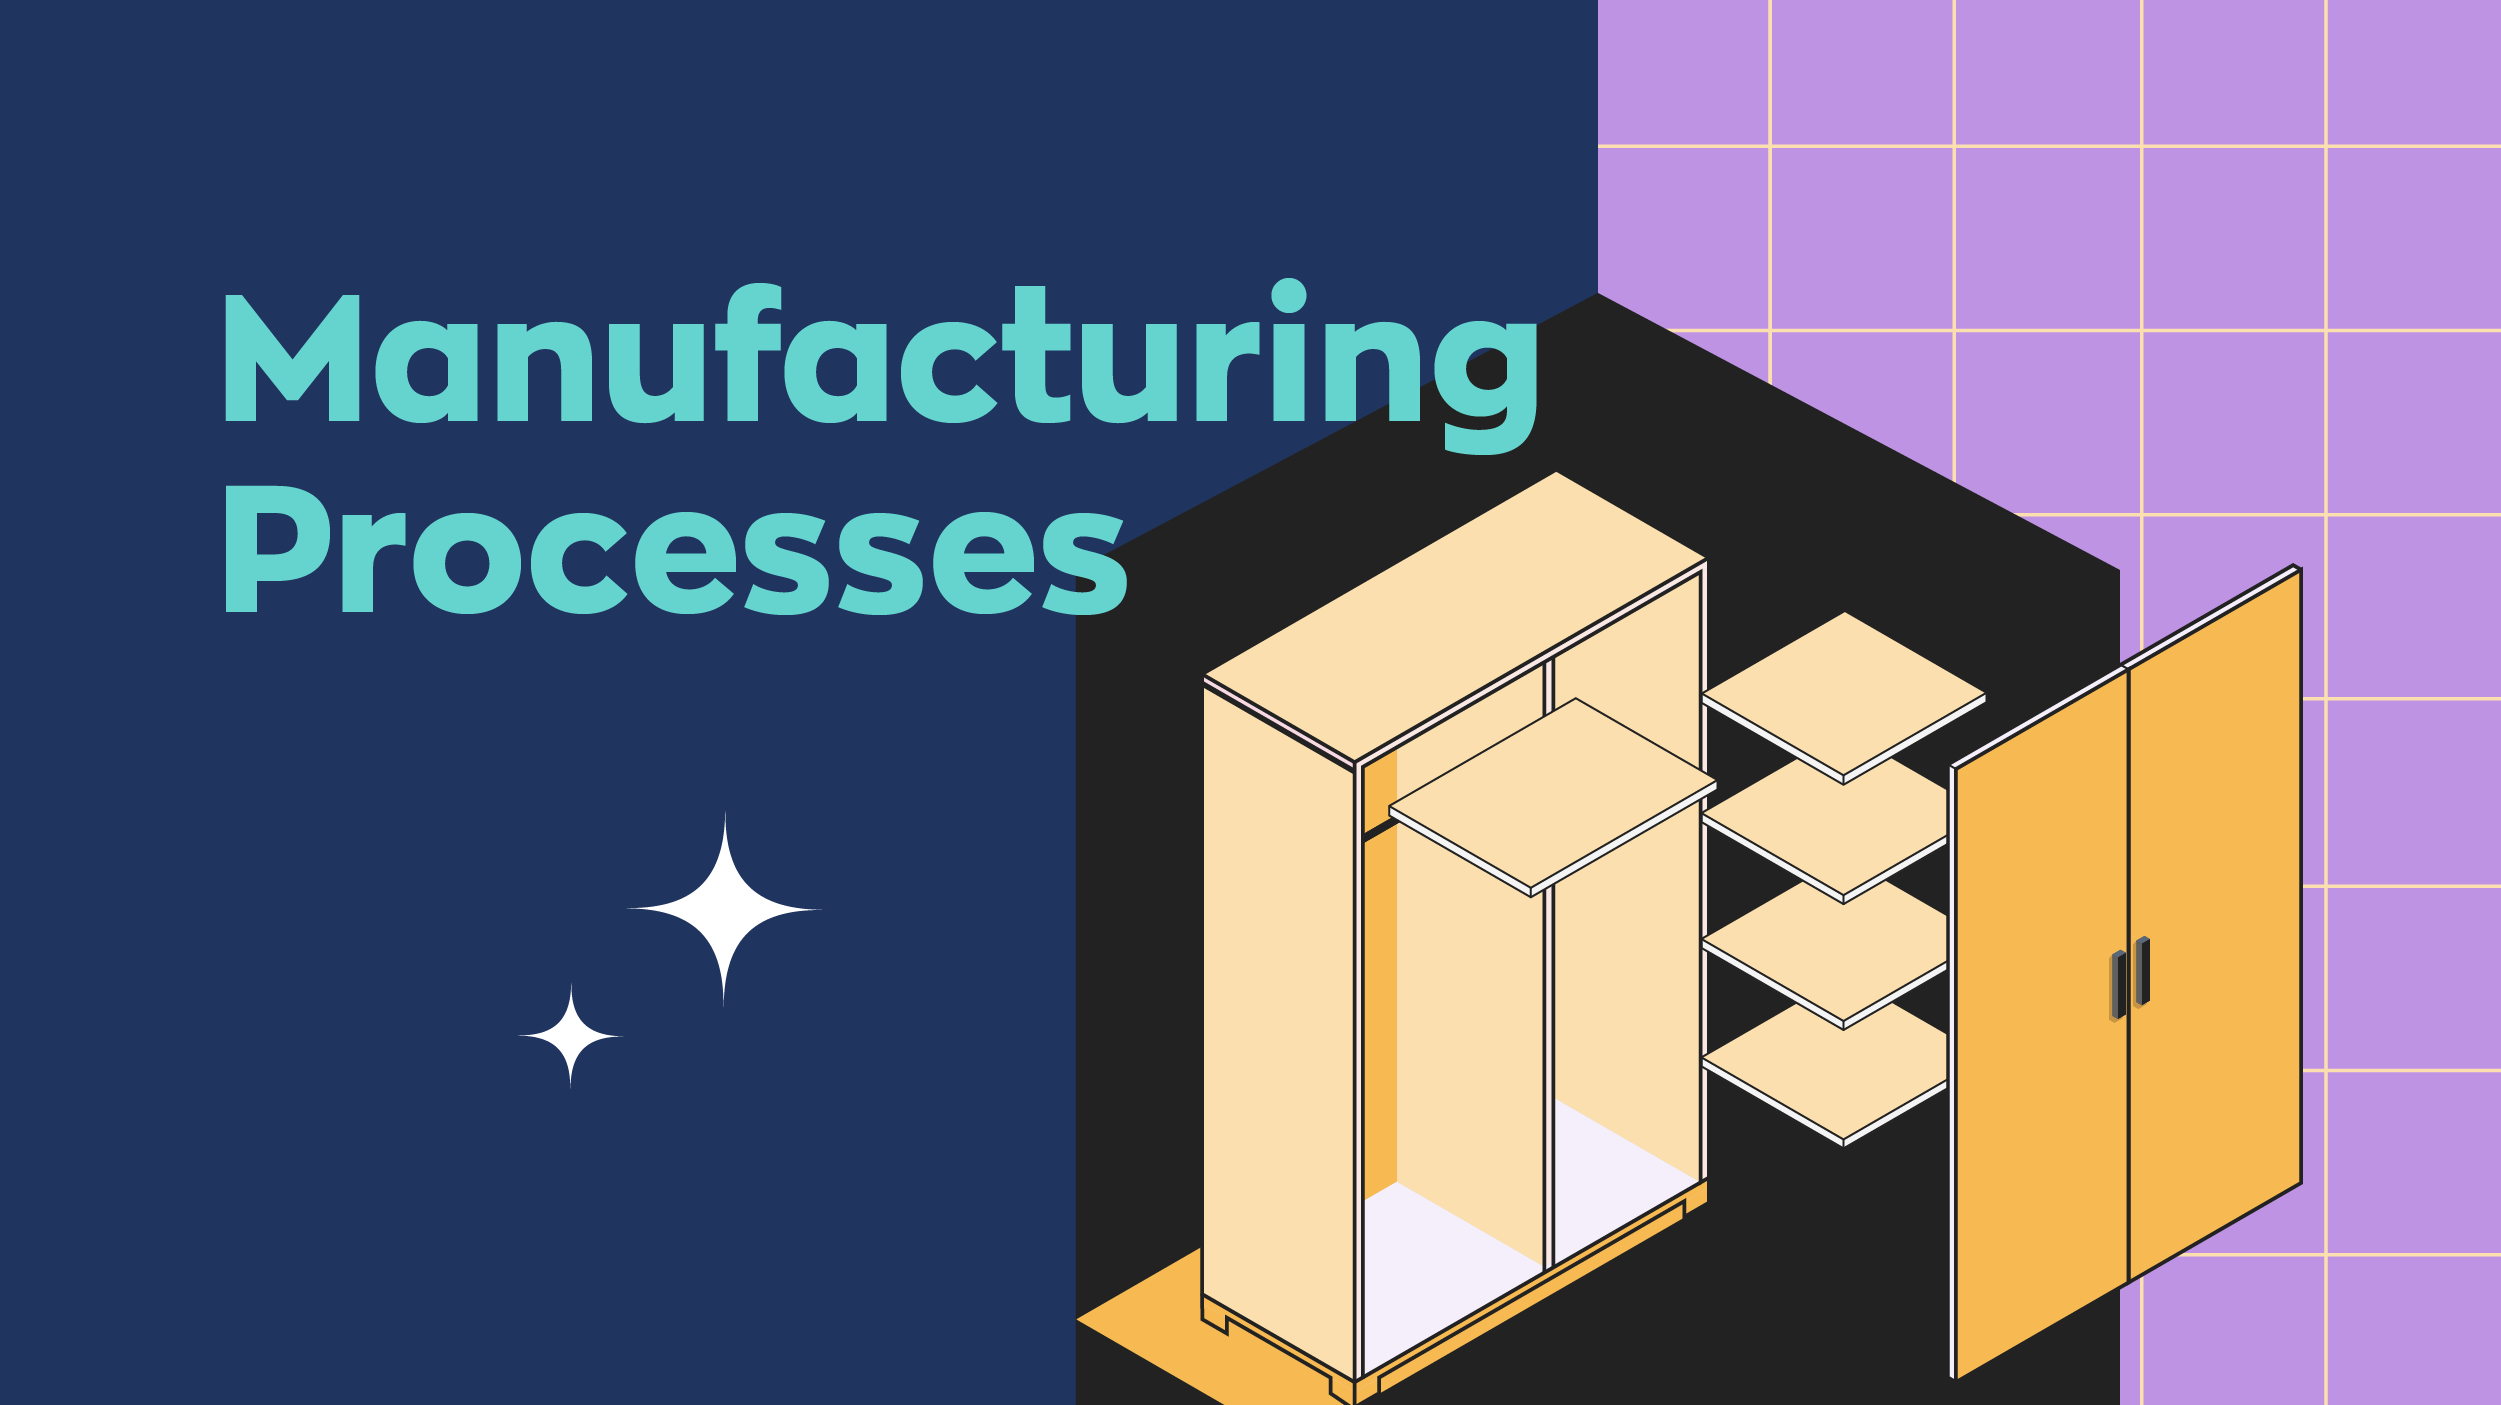 What Are the 6 Different Types of Manufacturing Processes?